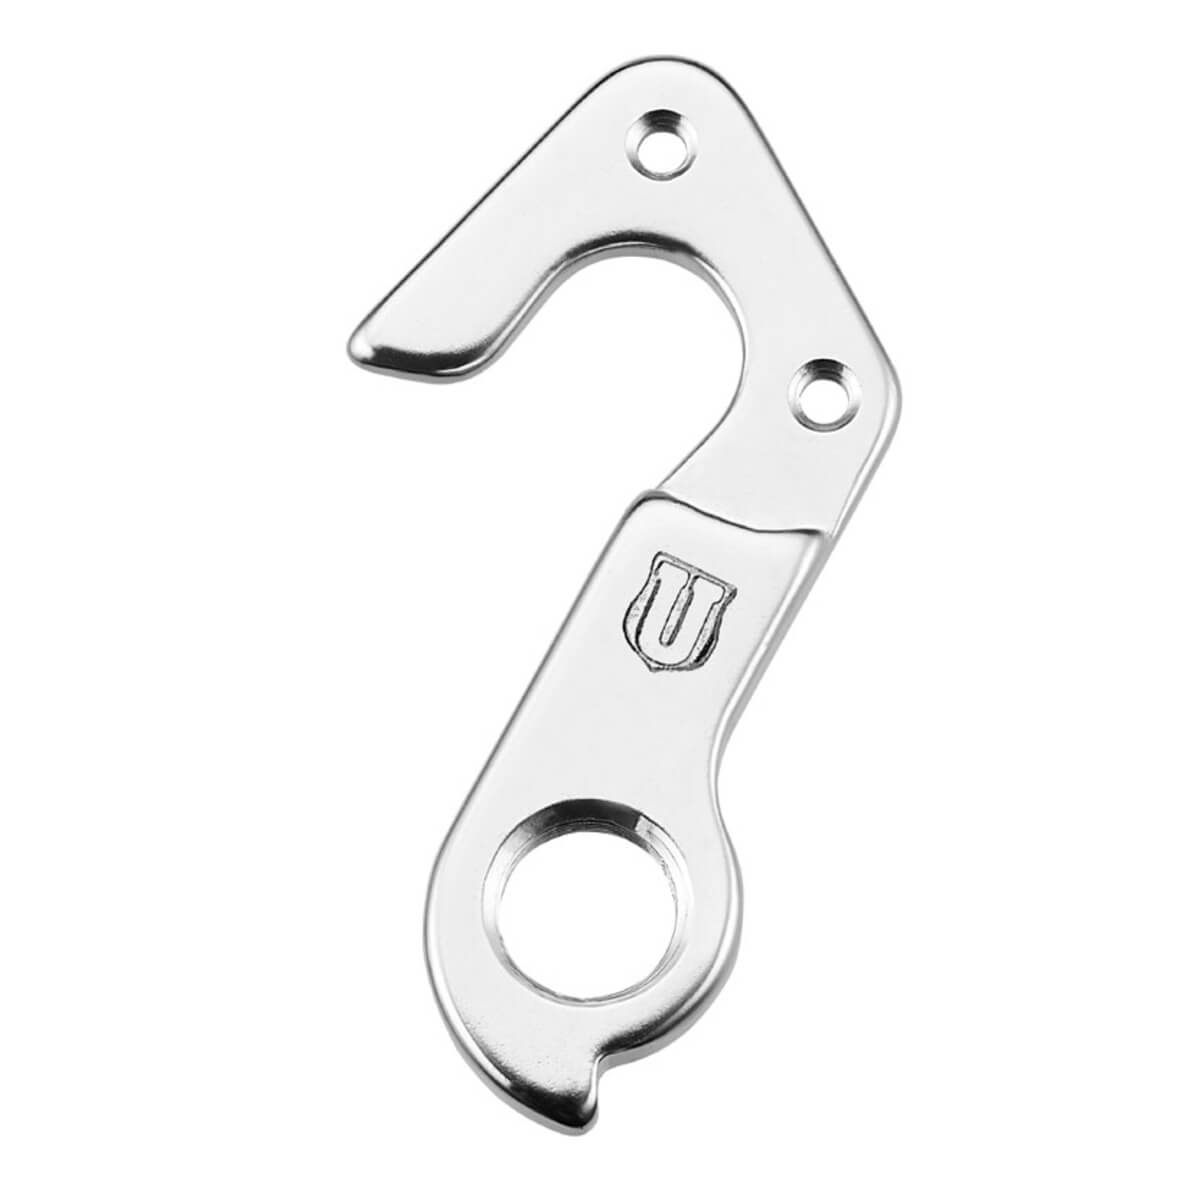 Marwi UNION GH-283 derailleur hanger for GT bicycle models front side